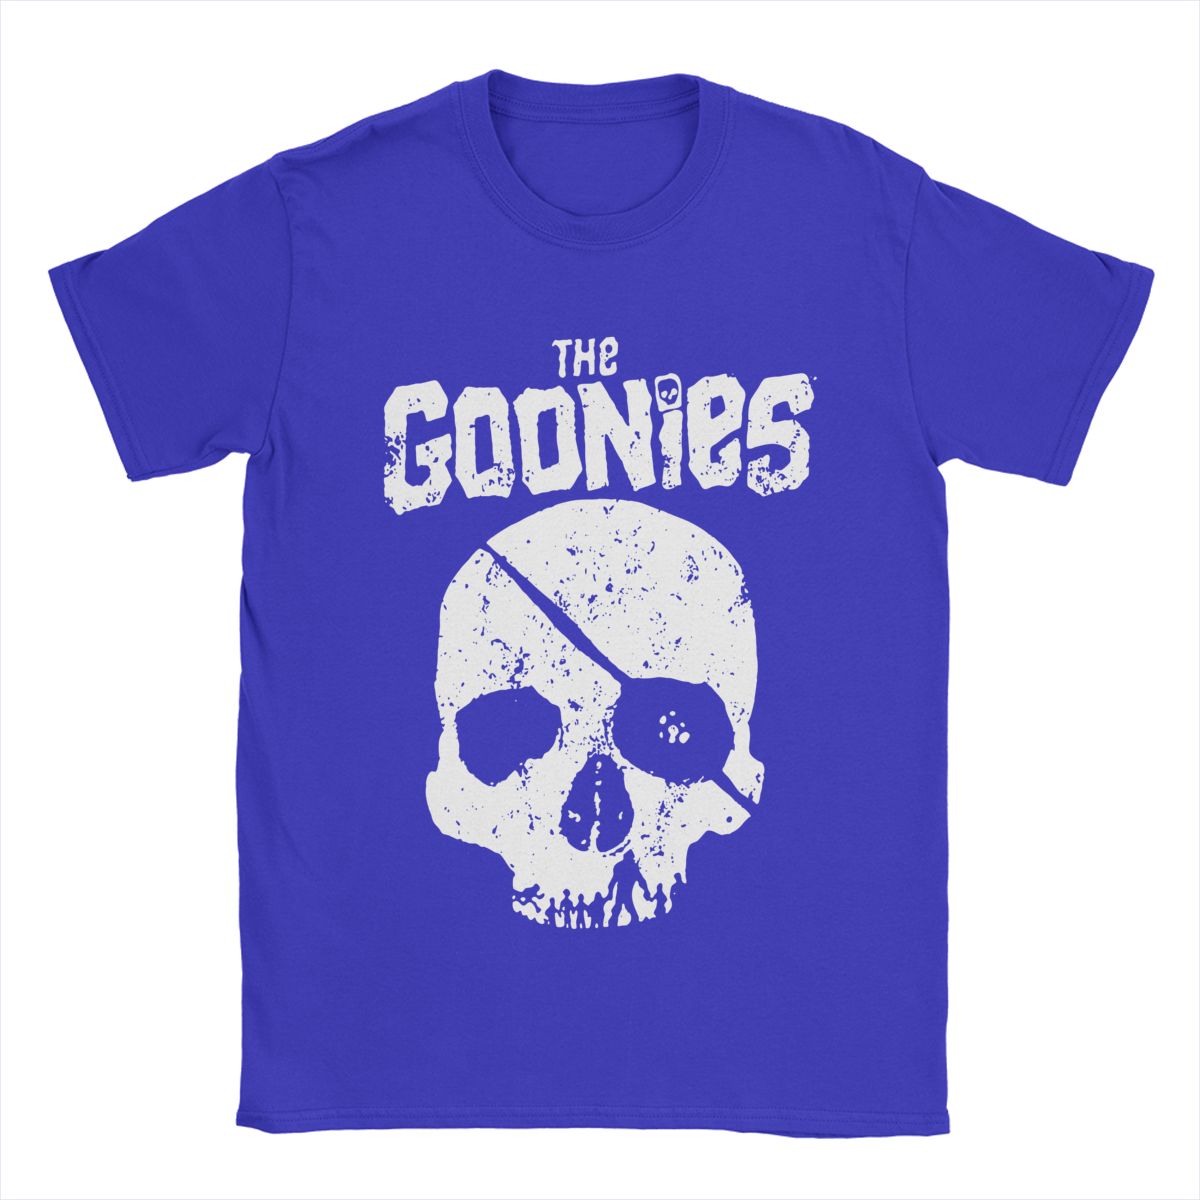 The Goonies - Classic 80s - Cult Childrens Movie - Vintage Film Lover T-Shirt-Blue-S-